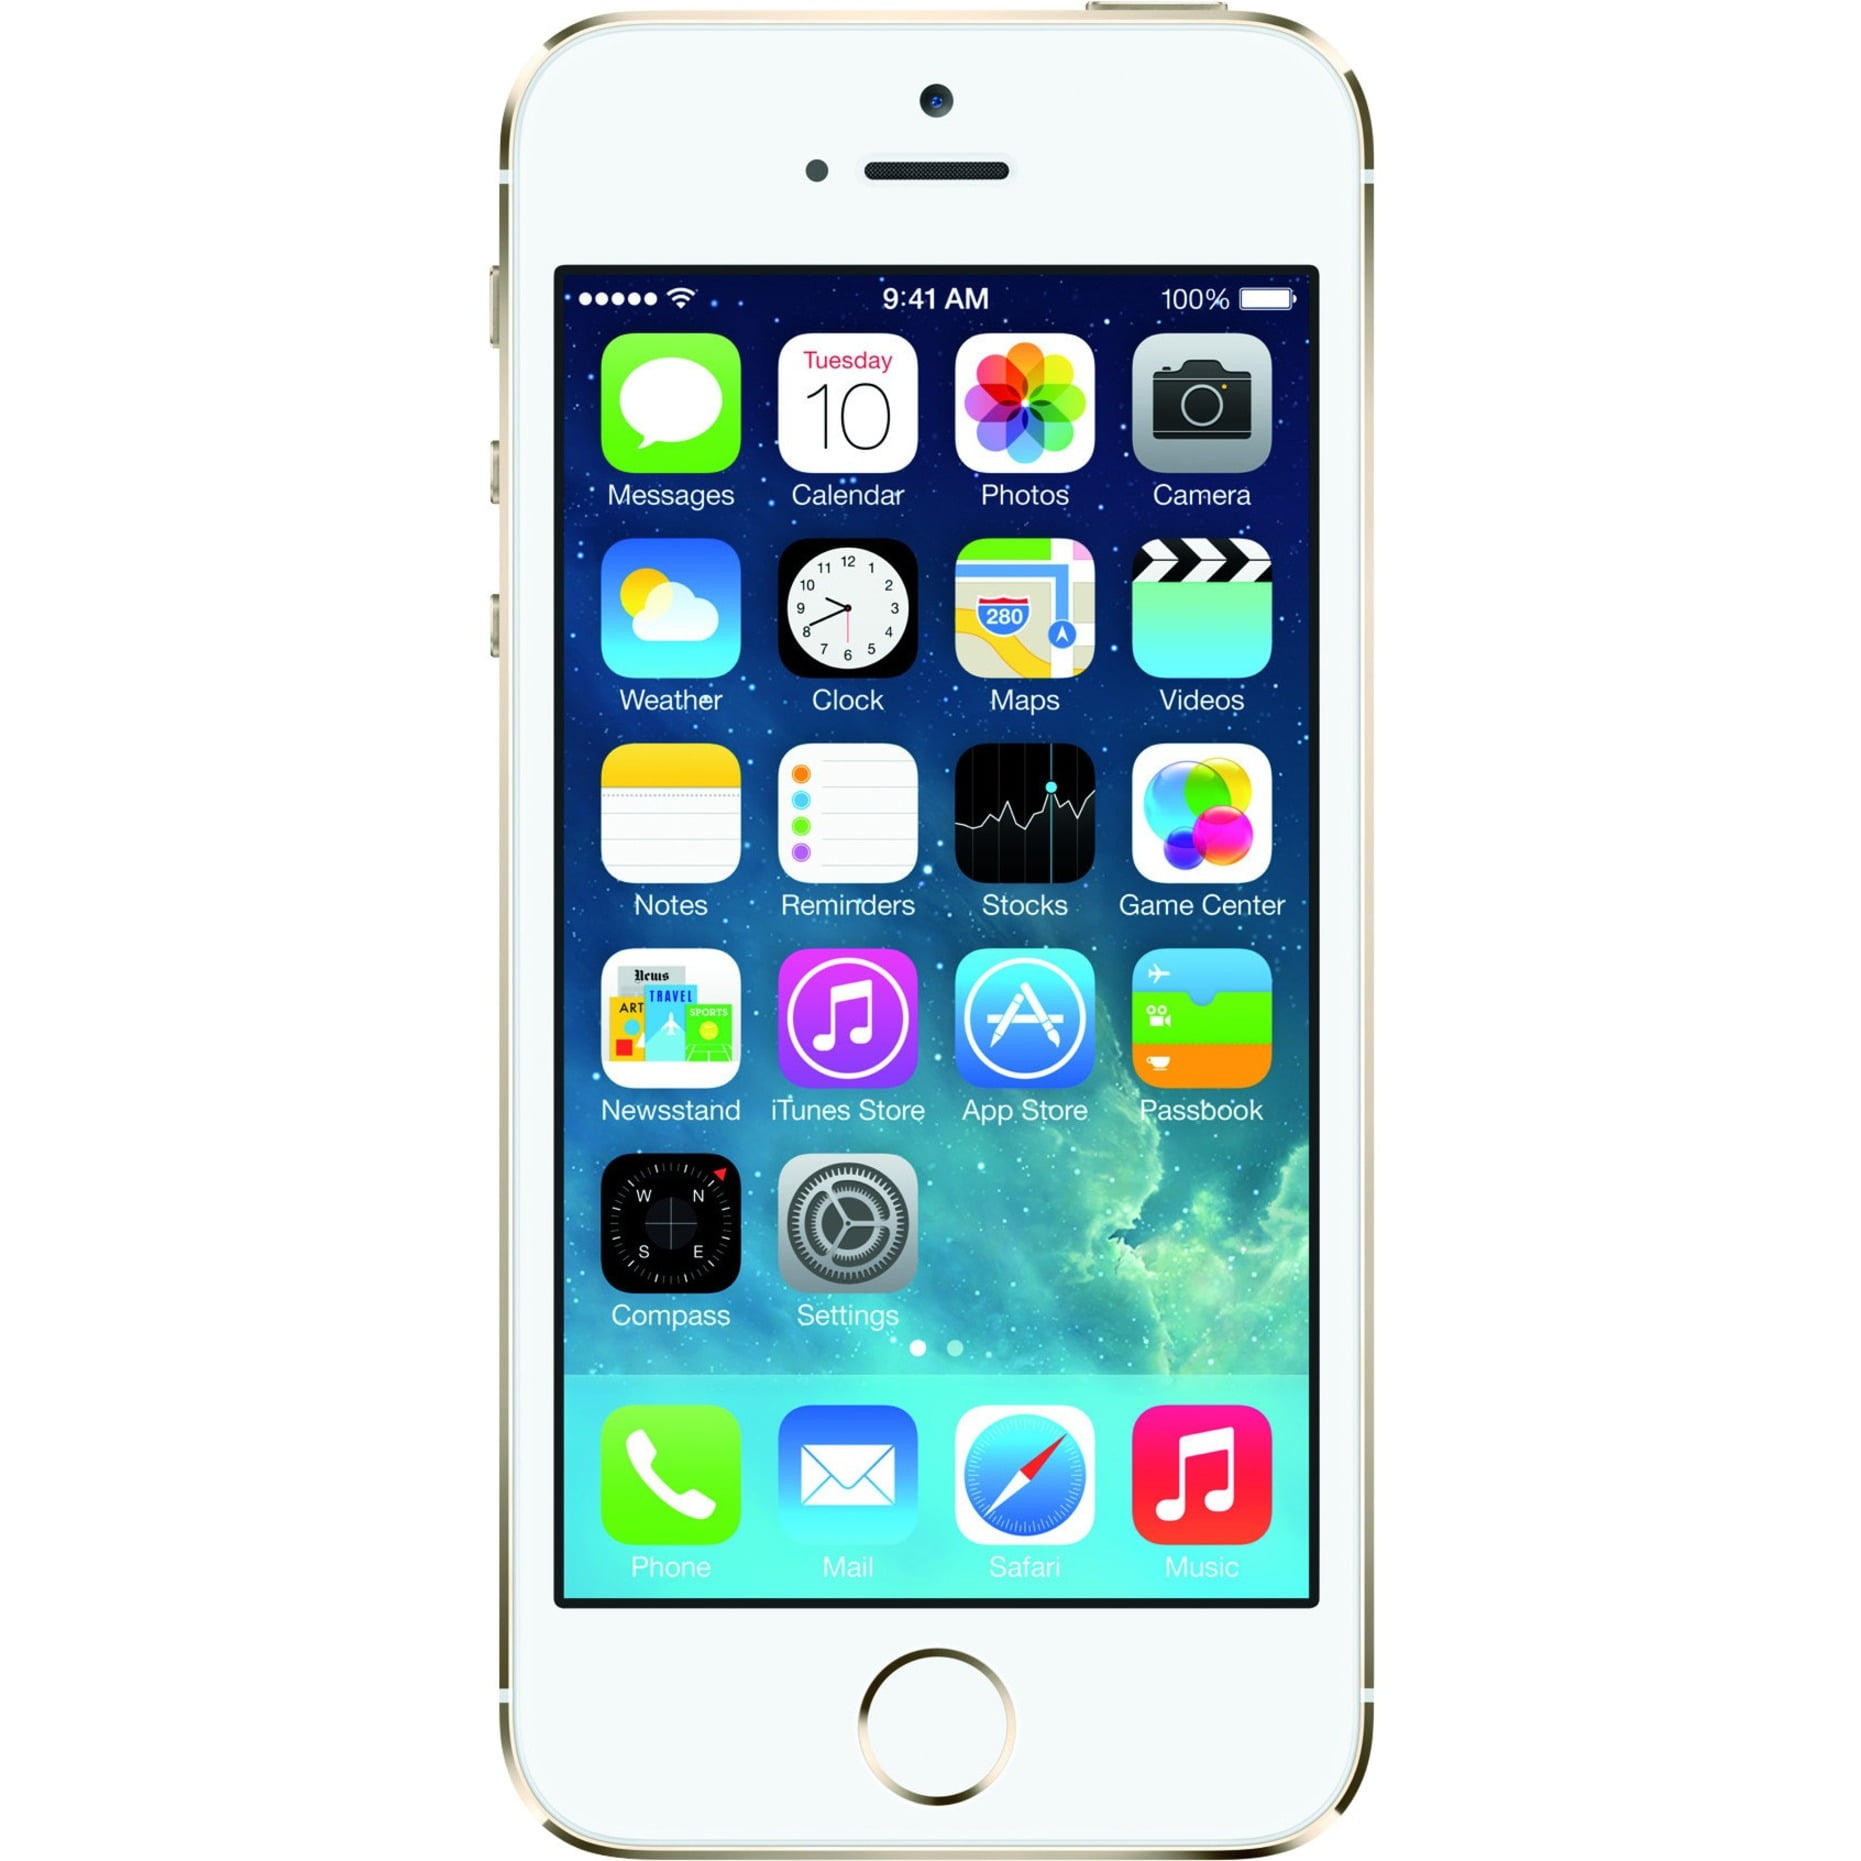 Vooruitgaan microscopisch Troosteloos Apple iPhone 5s 16GB GSM 4G LTE Dual-Core Phone with 8MP Camera, Gold -  Walmart.com